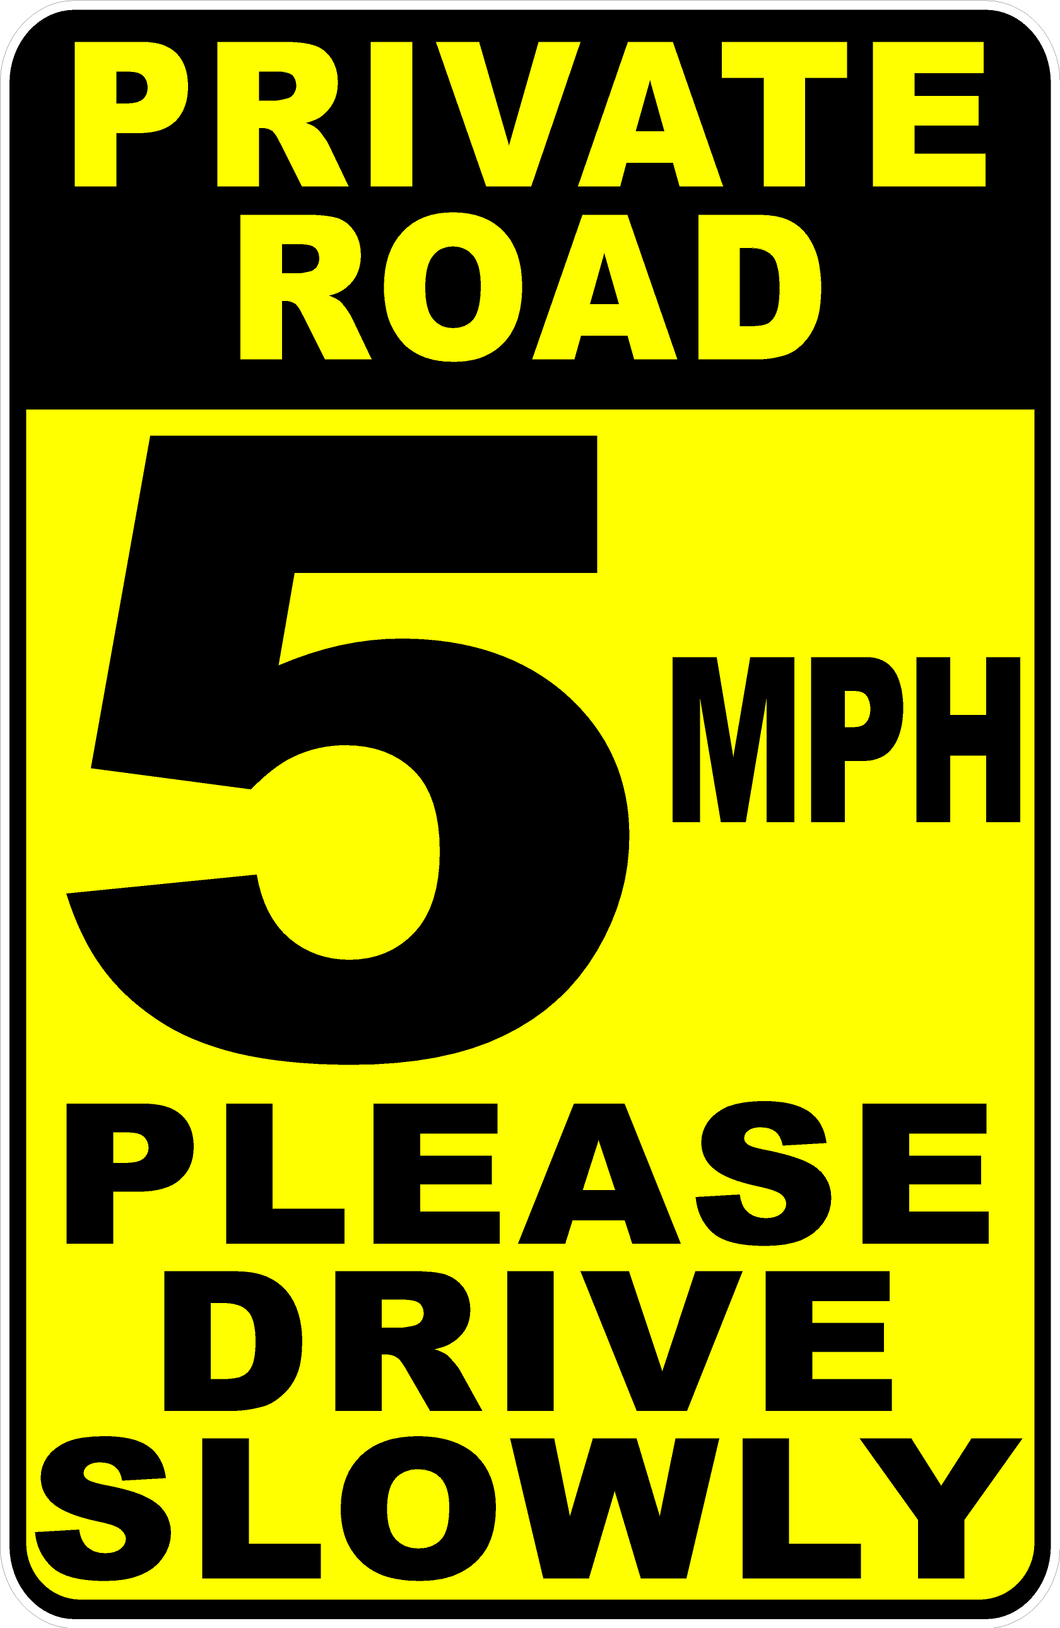 Private Road Speed Limit 5 MPH Please Drive Slowly Sign